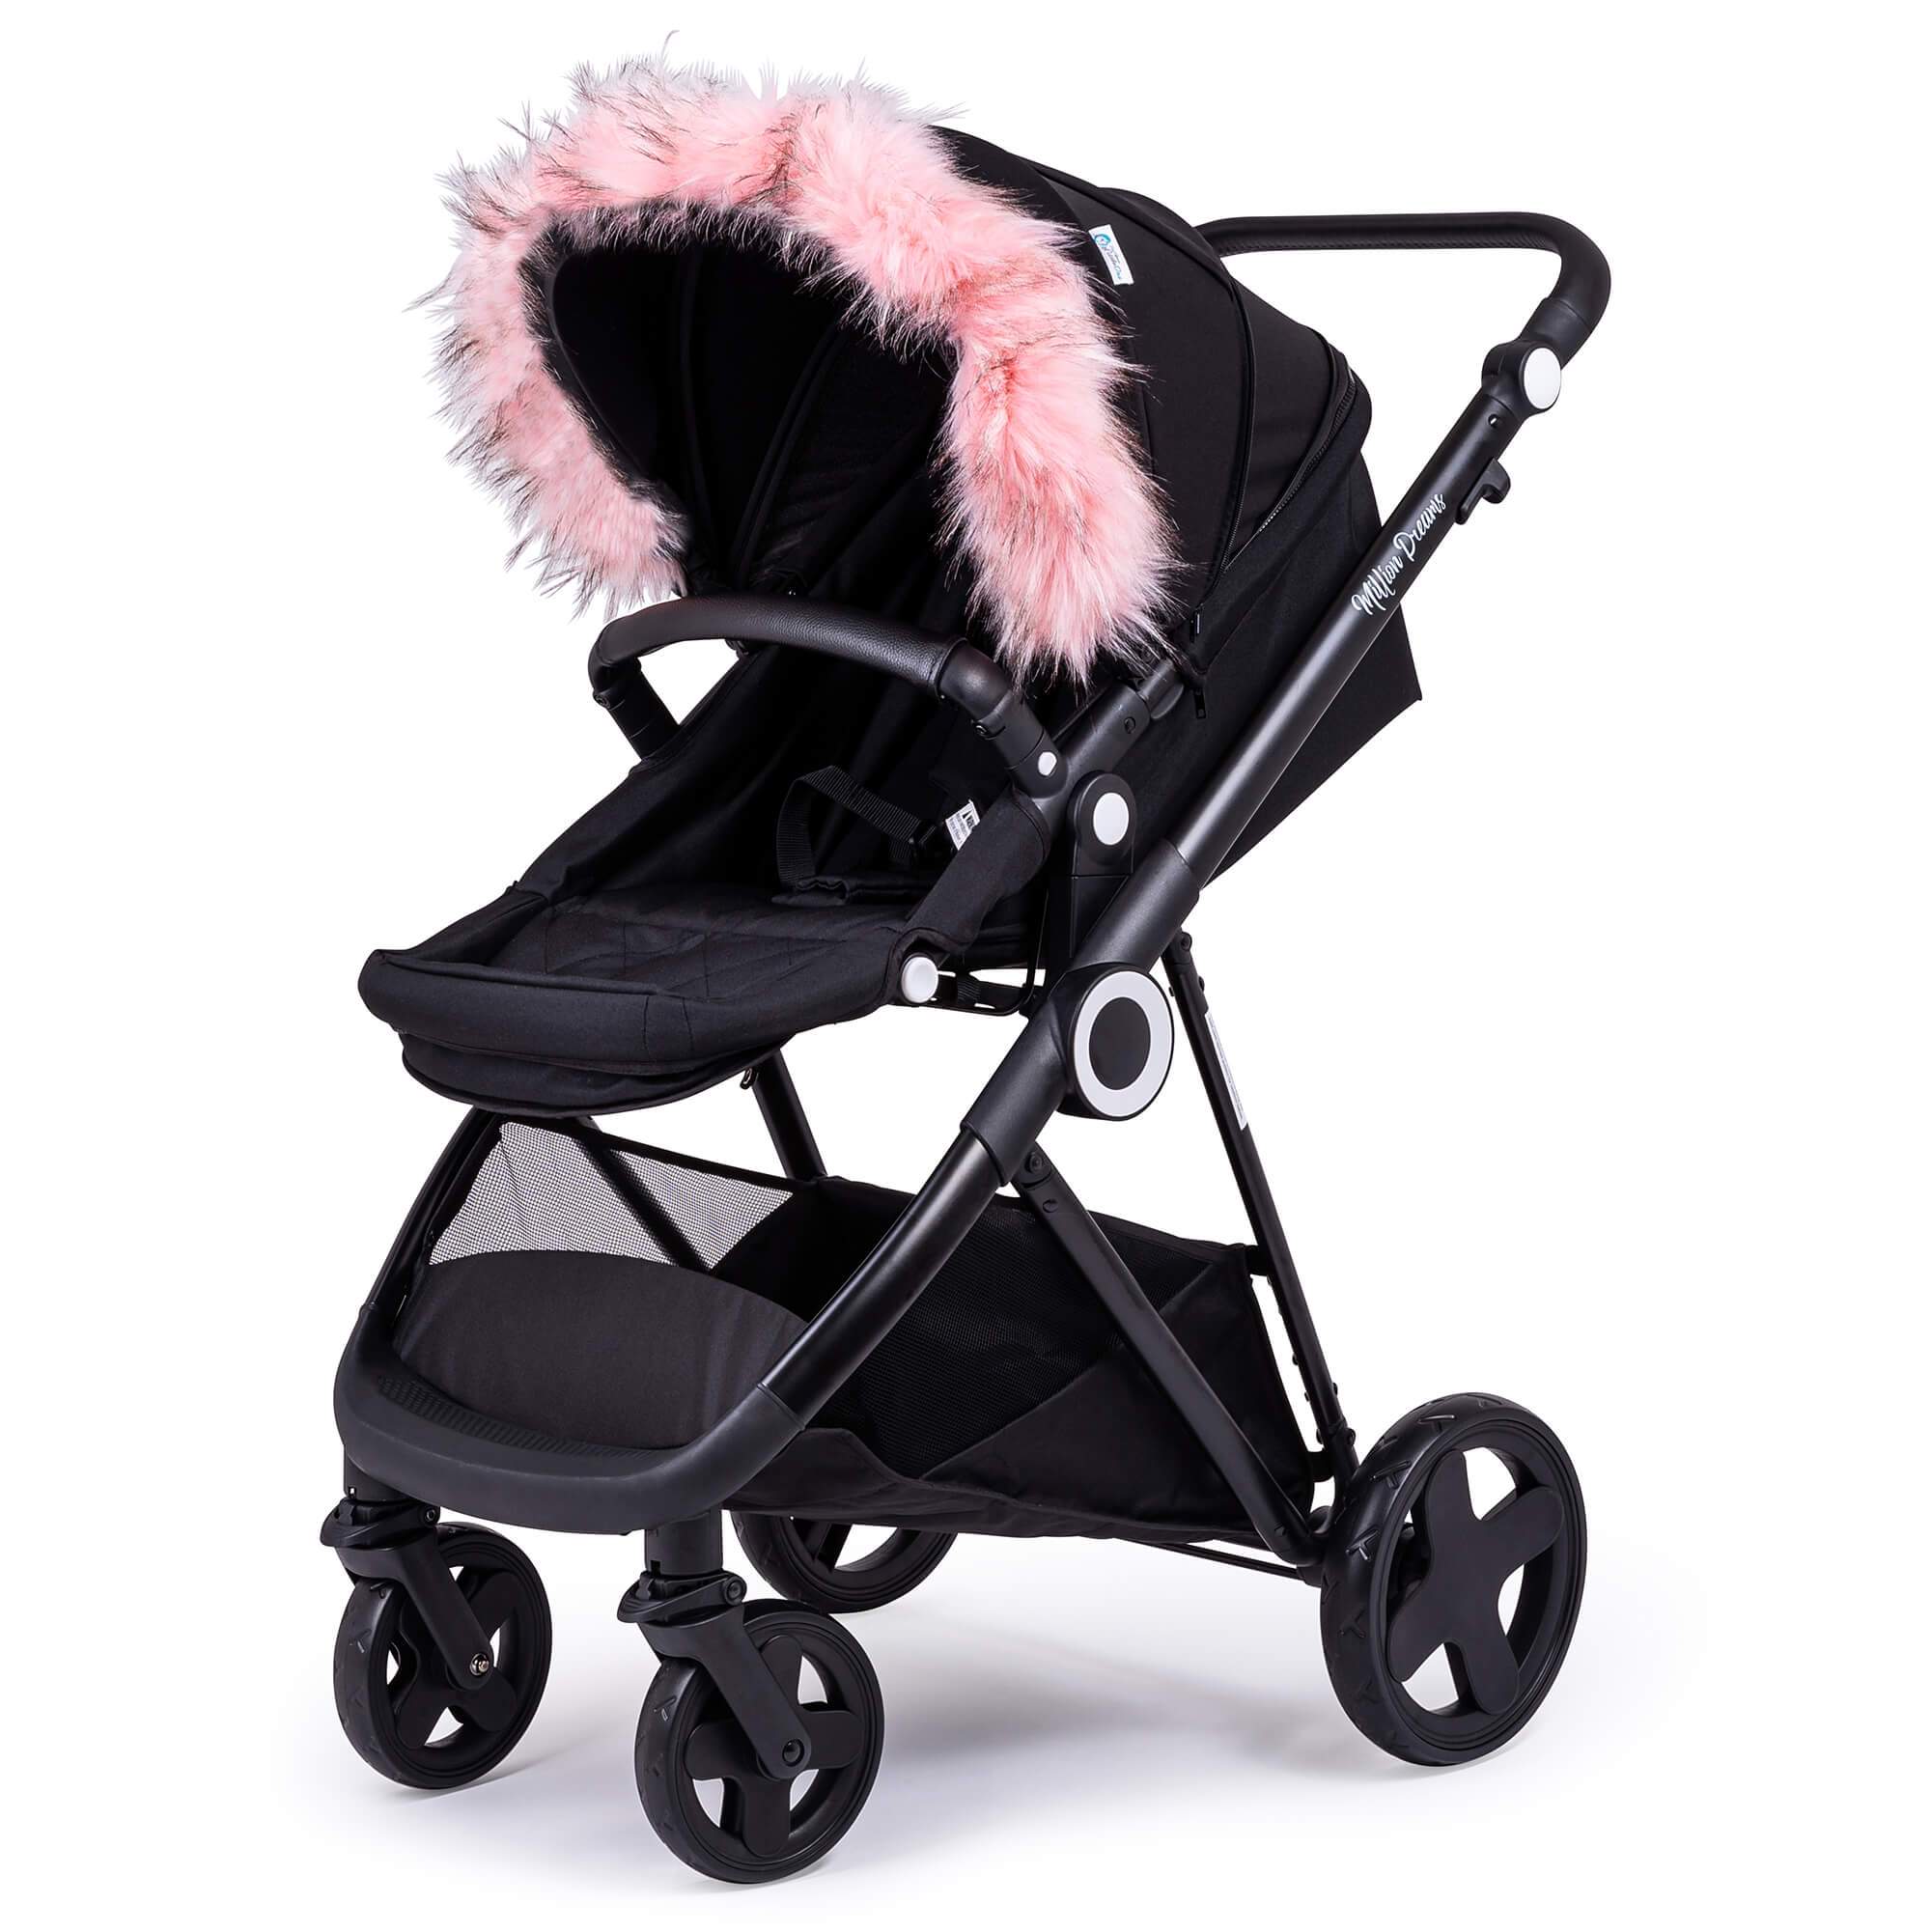 Pram Fur Hood Trim Attachment For Pushchair Compatible with Gb - Light Pink / Fits All Models | For Your Little One